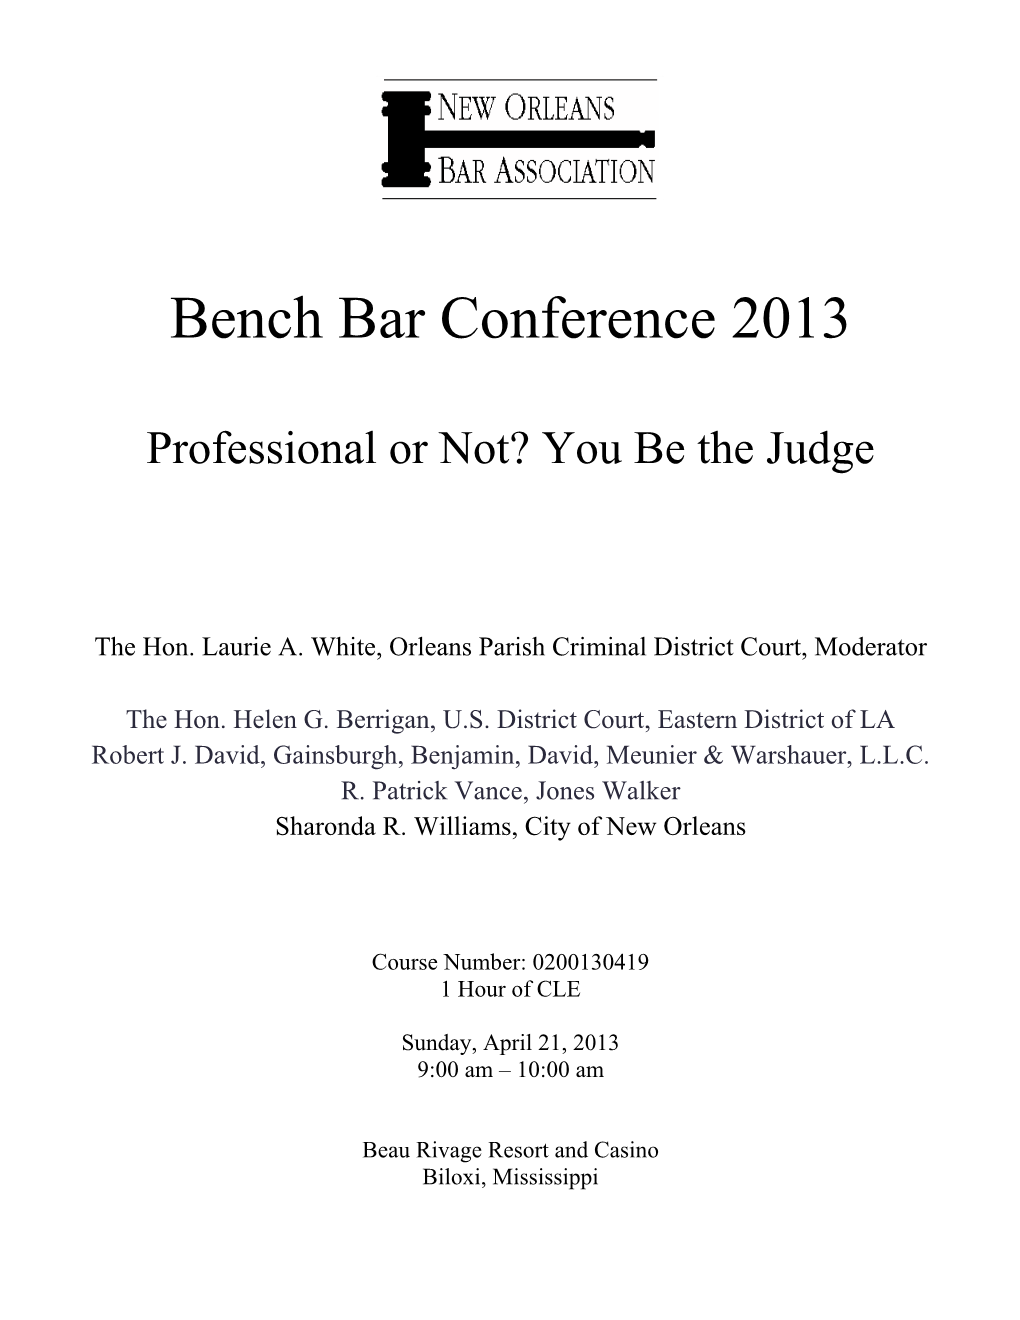 Bench Bar Conference 2013